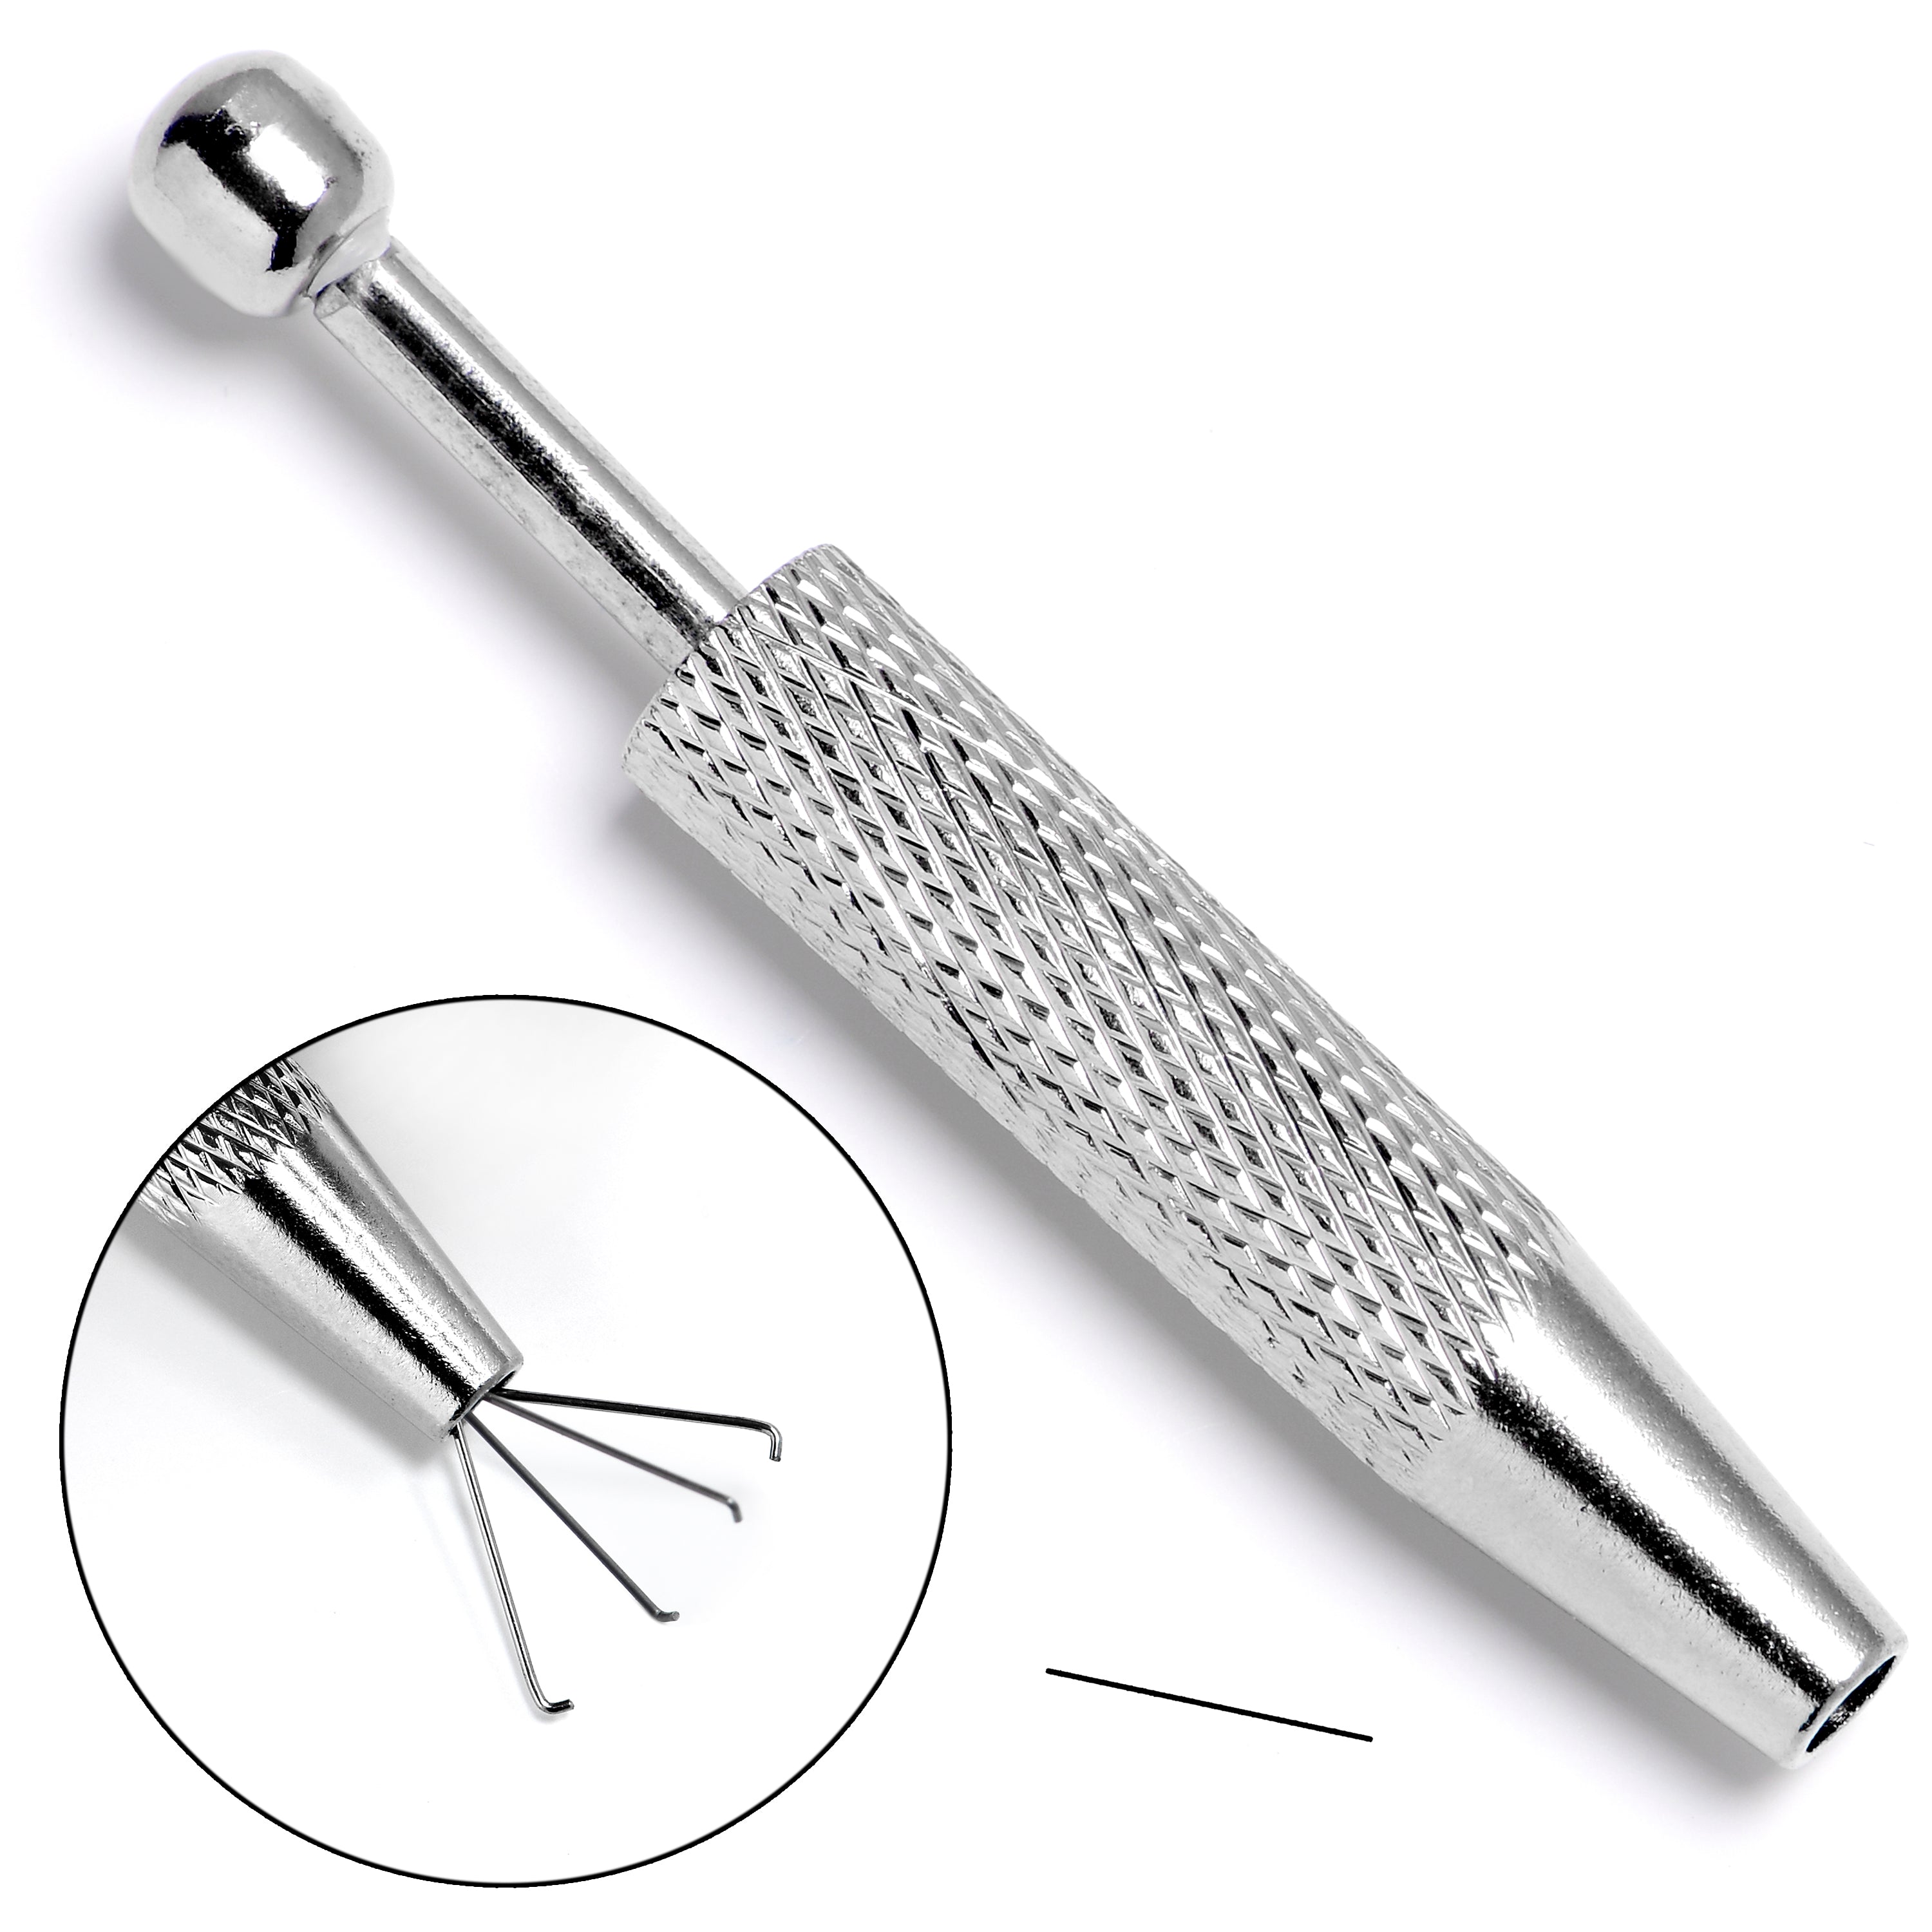 Body Jewelry Ball Holder/Removal Tool - 2 Sizes Per Tool (3mm & 4mm)